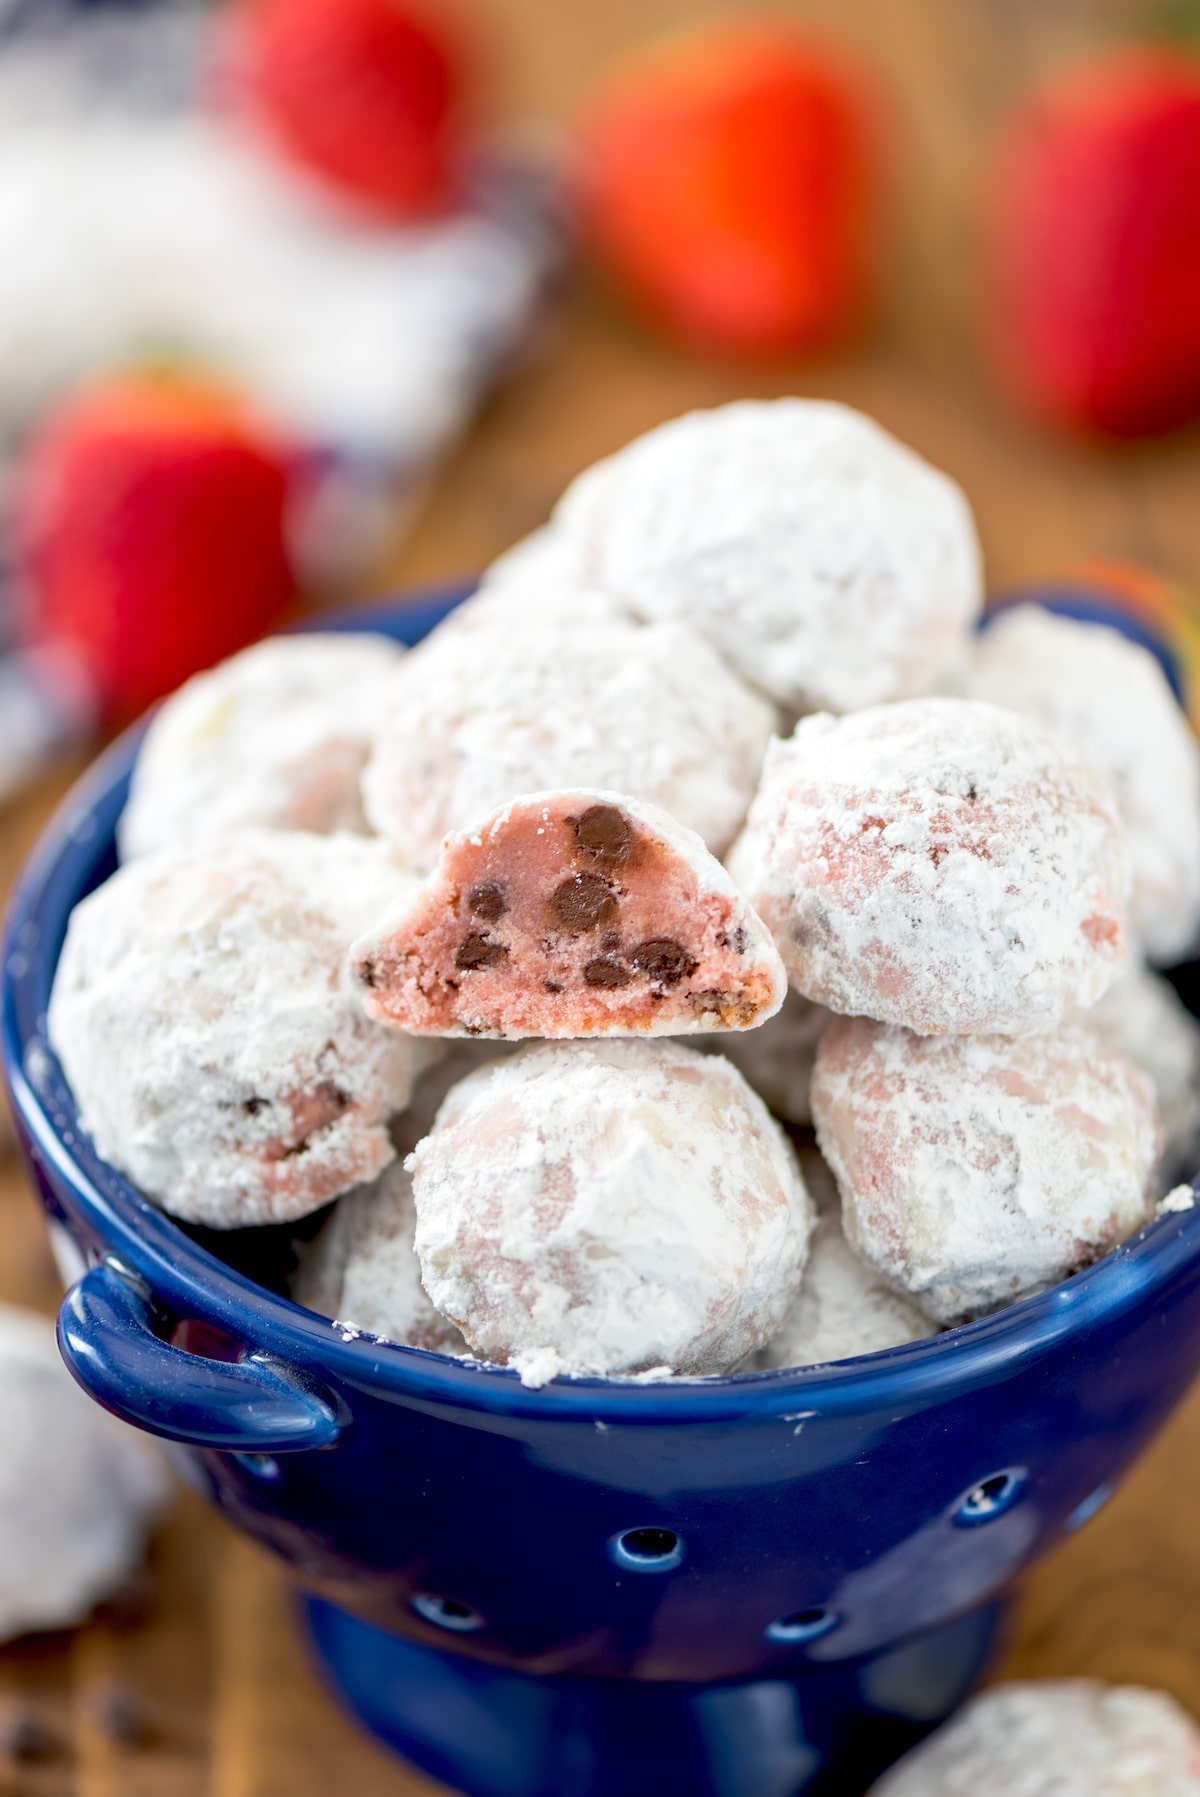 strawberry snowballs cut in half with chocolate chips baked in.